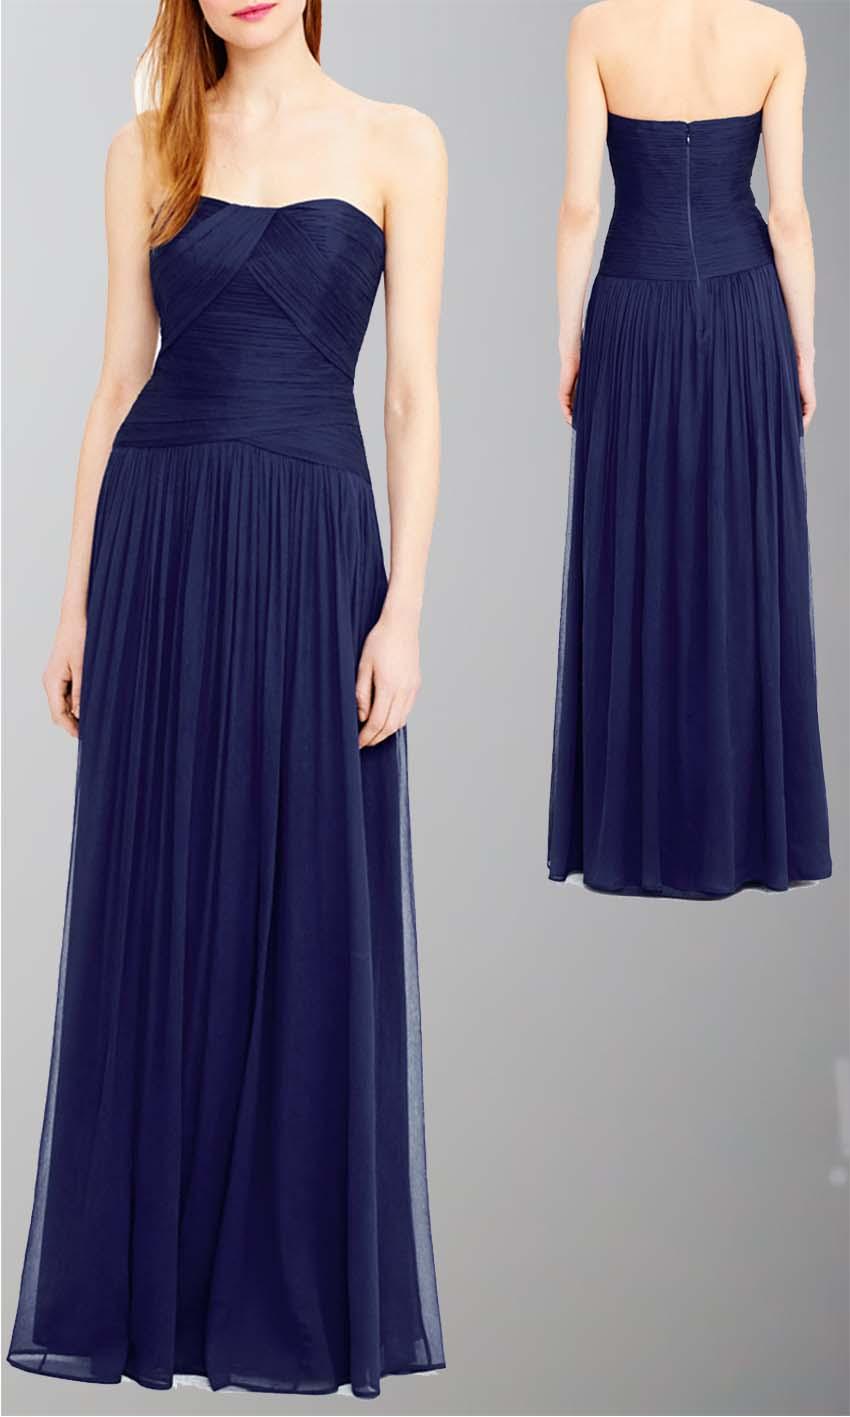 Hochzeit - Navy Draped Flattering Long Bridesmaid Dress UK KSP337 [KSP337] - £92.00 : Cheap Prom Dresses Uk, Bridesmaid Dresses, 2014 Prom & Evening Dresses, Look for cheap elegant prom dresses 2014, cocktail gowns, or dresses for special occasions? kissprom.co.uk o